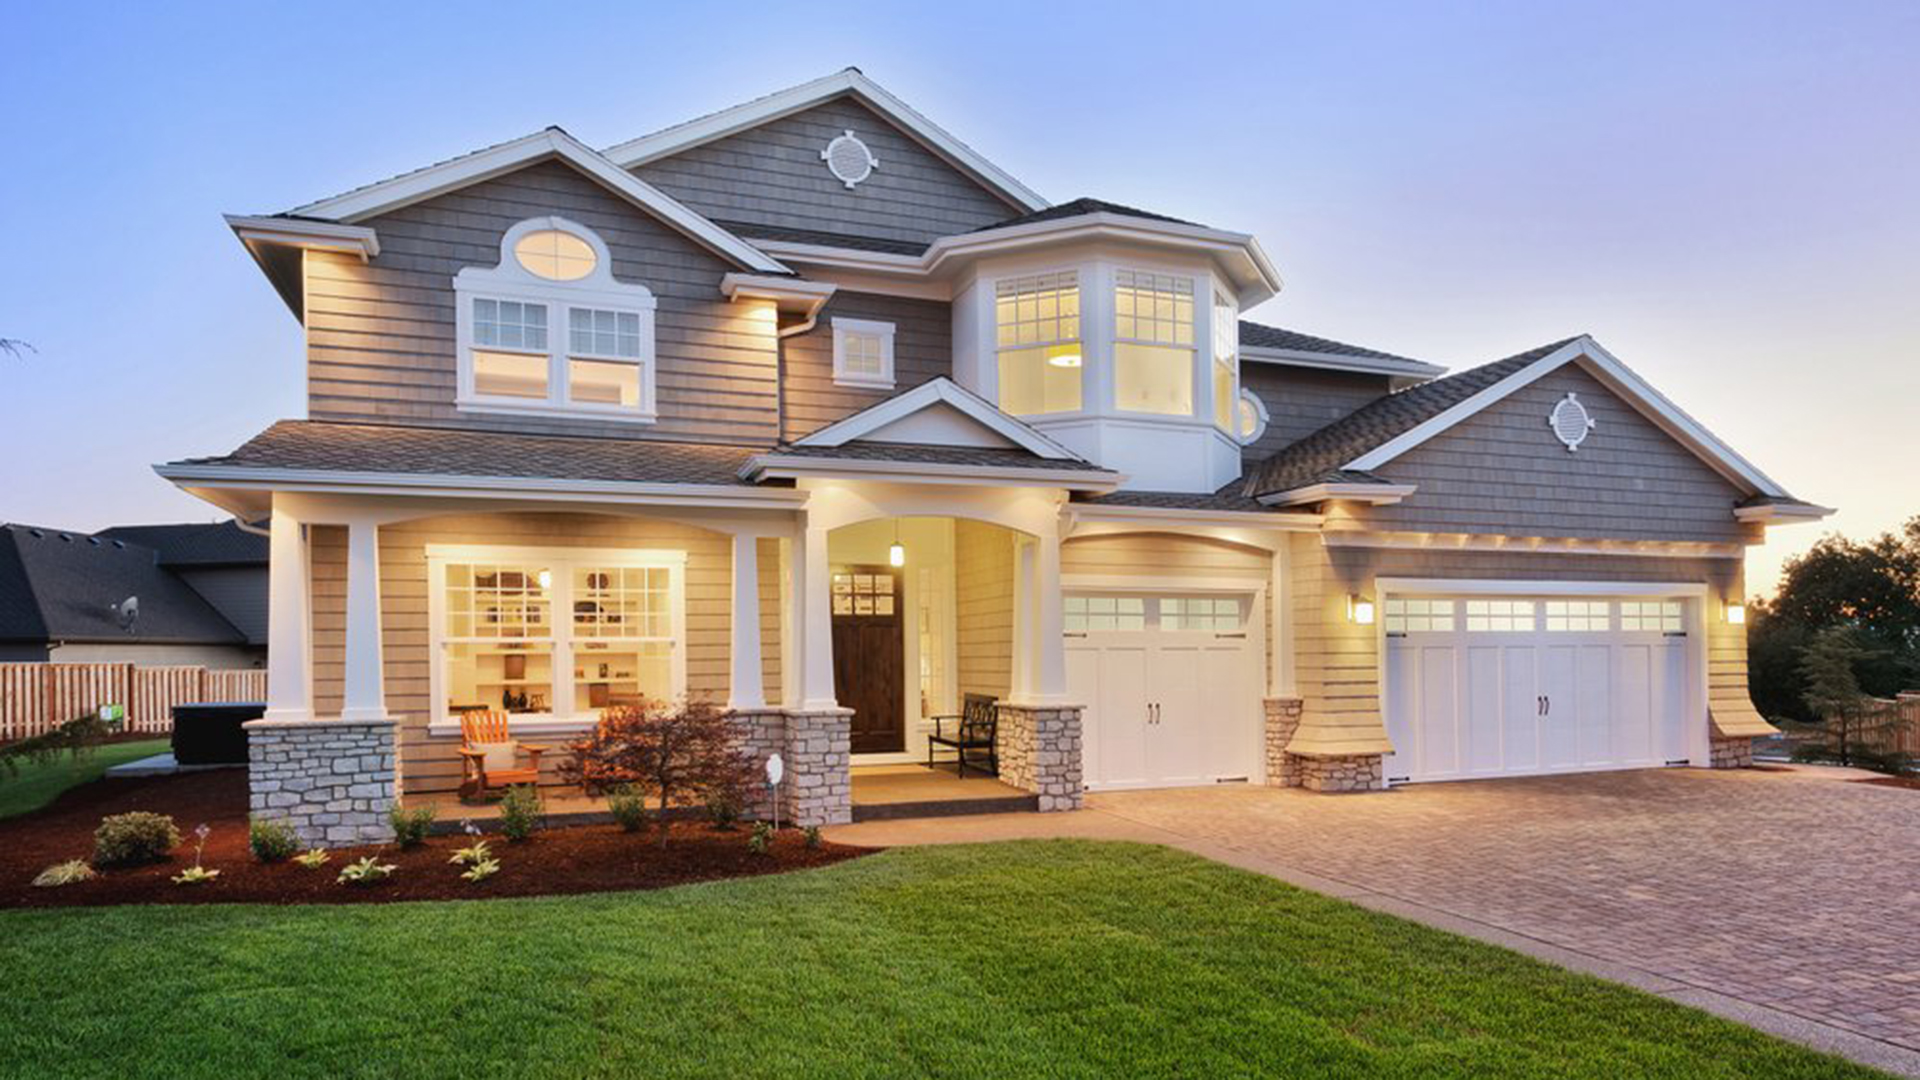 Budget-Friendly Home Improvement Tips for First-Time Homeowners